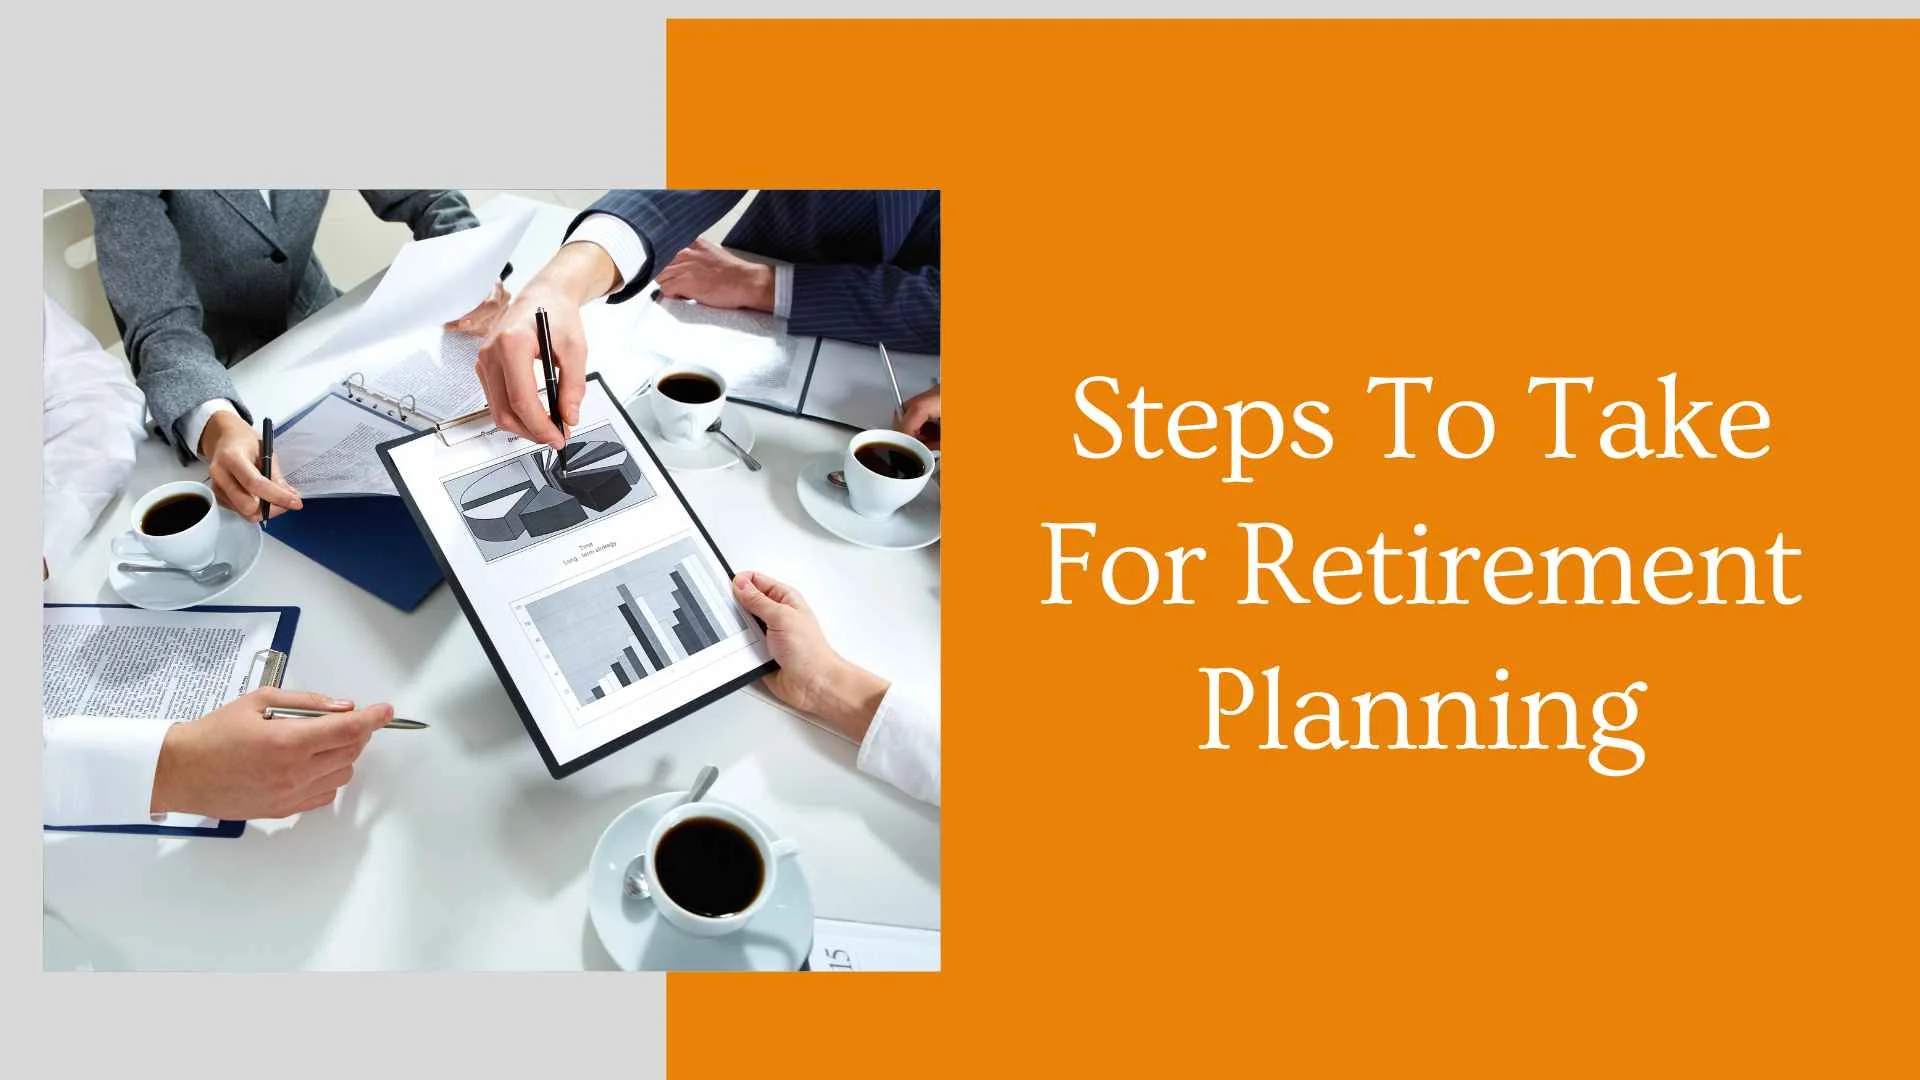 Steps To Take For Retirement Planning